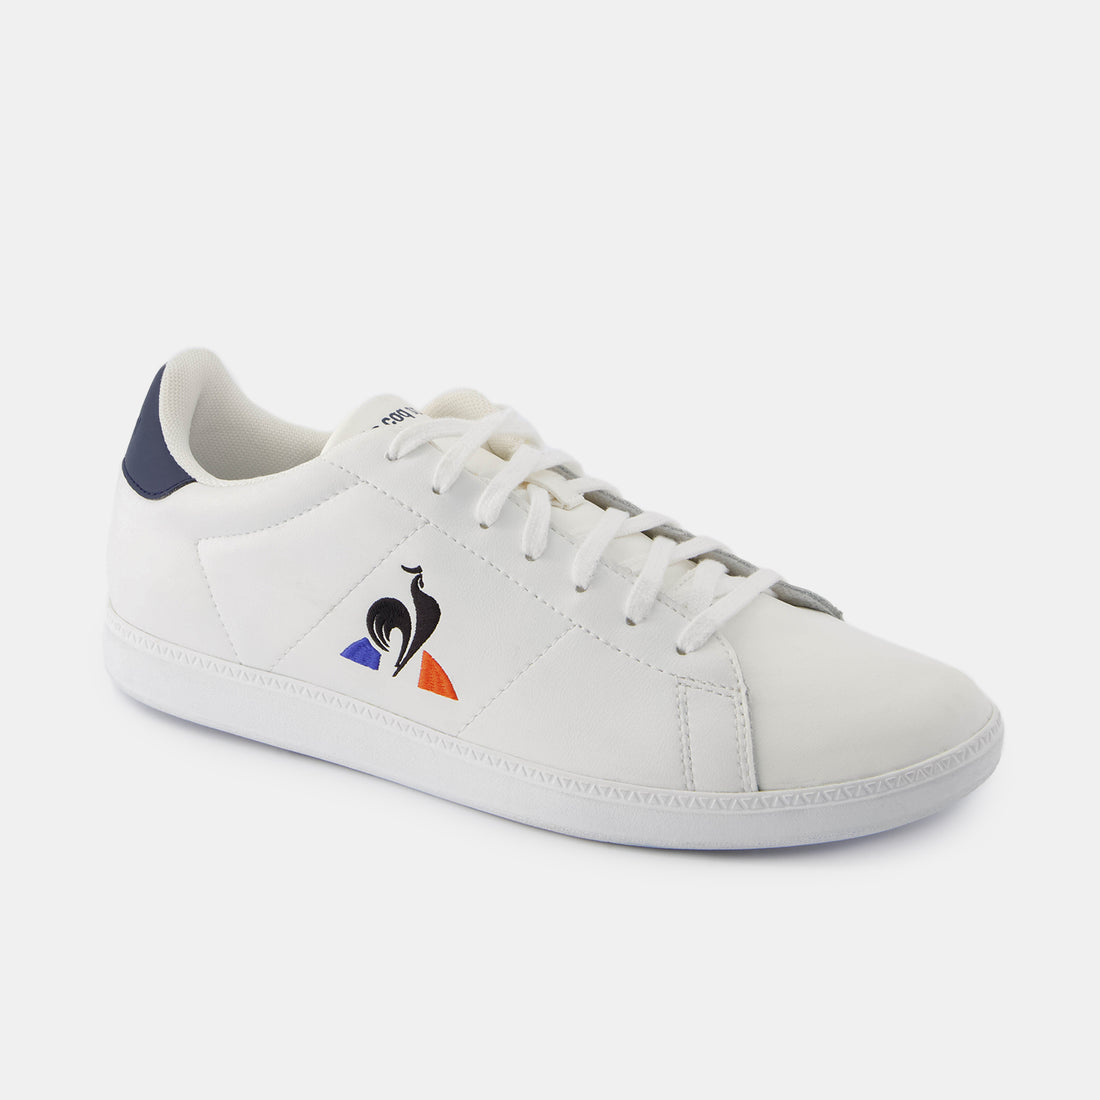 2423203-COURTSET_2 optical white/dress blue | Chaussures COURTSET_2 Homme